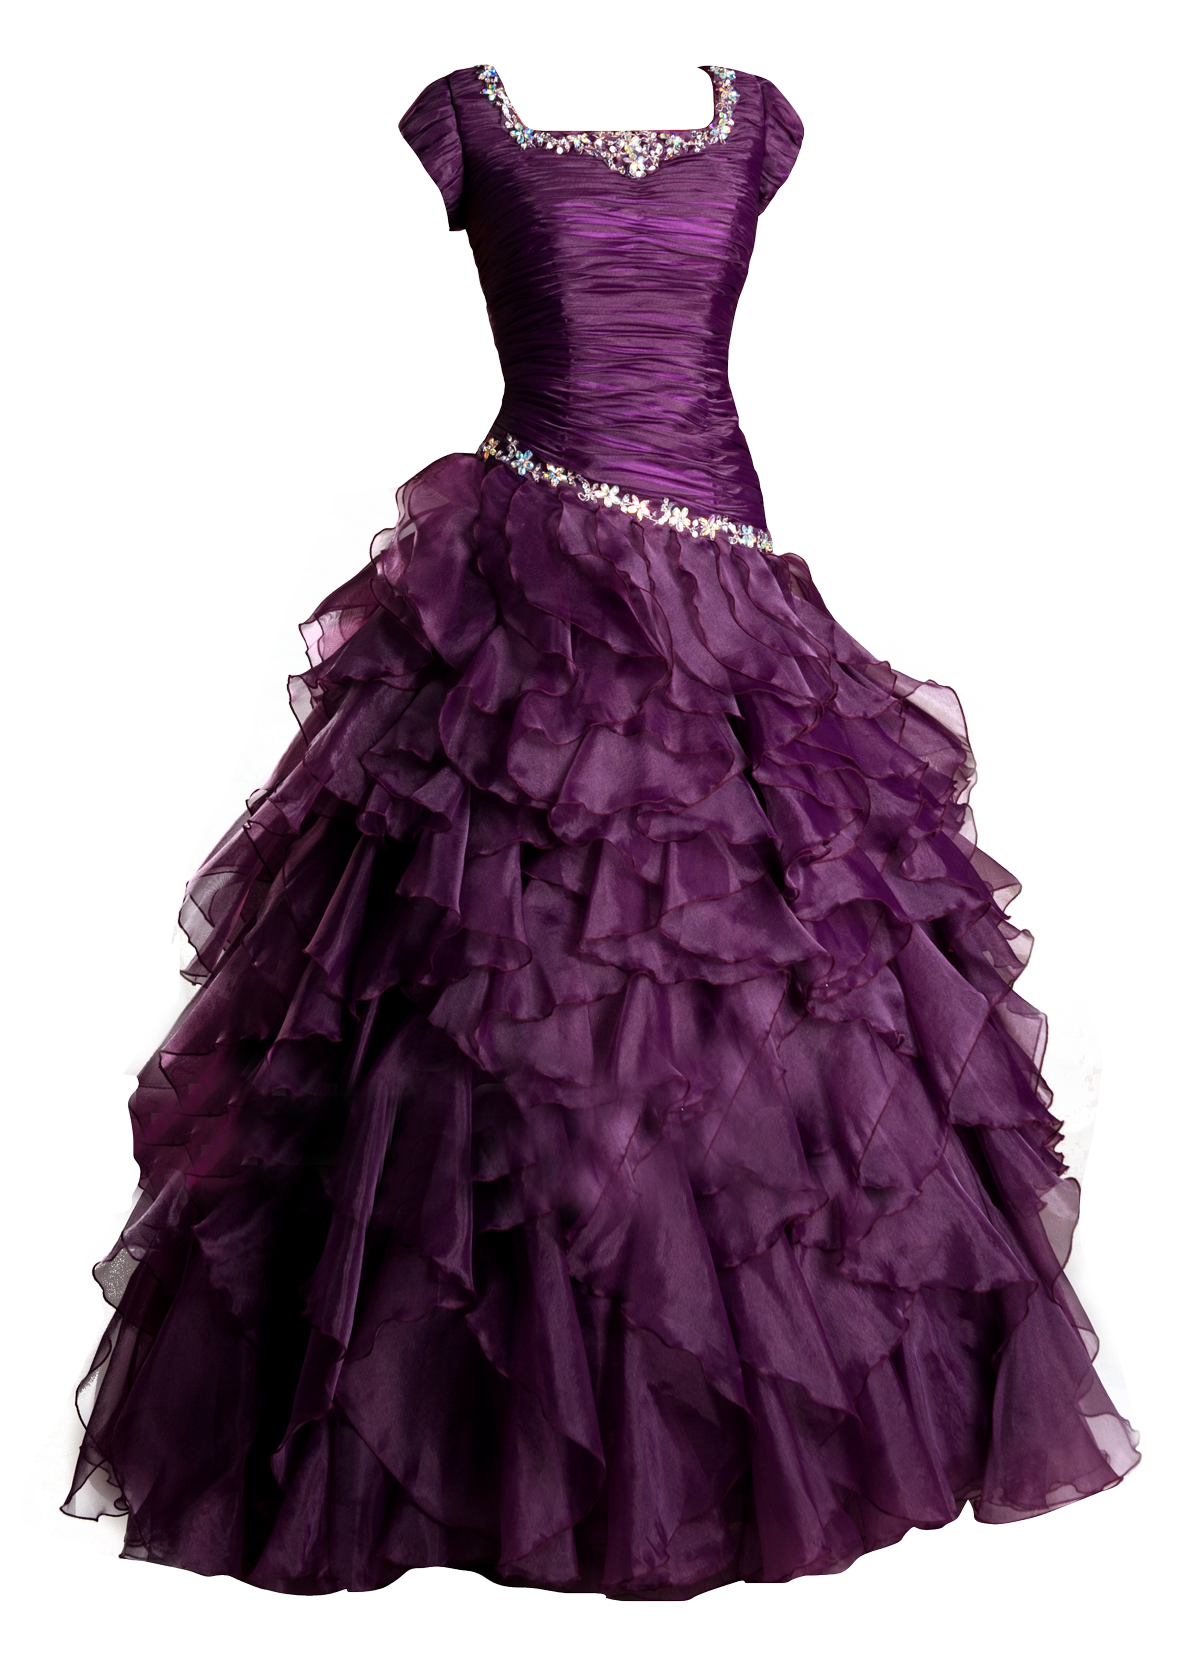 Dress Picture PNG Image